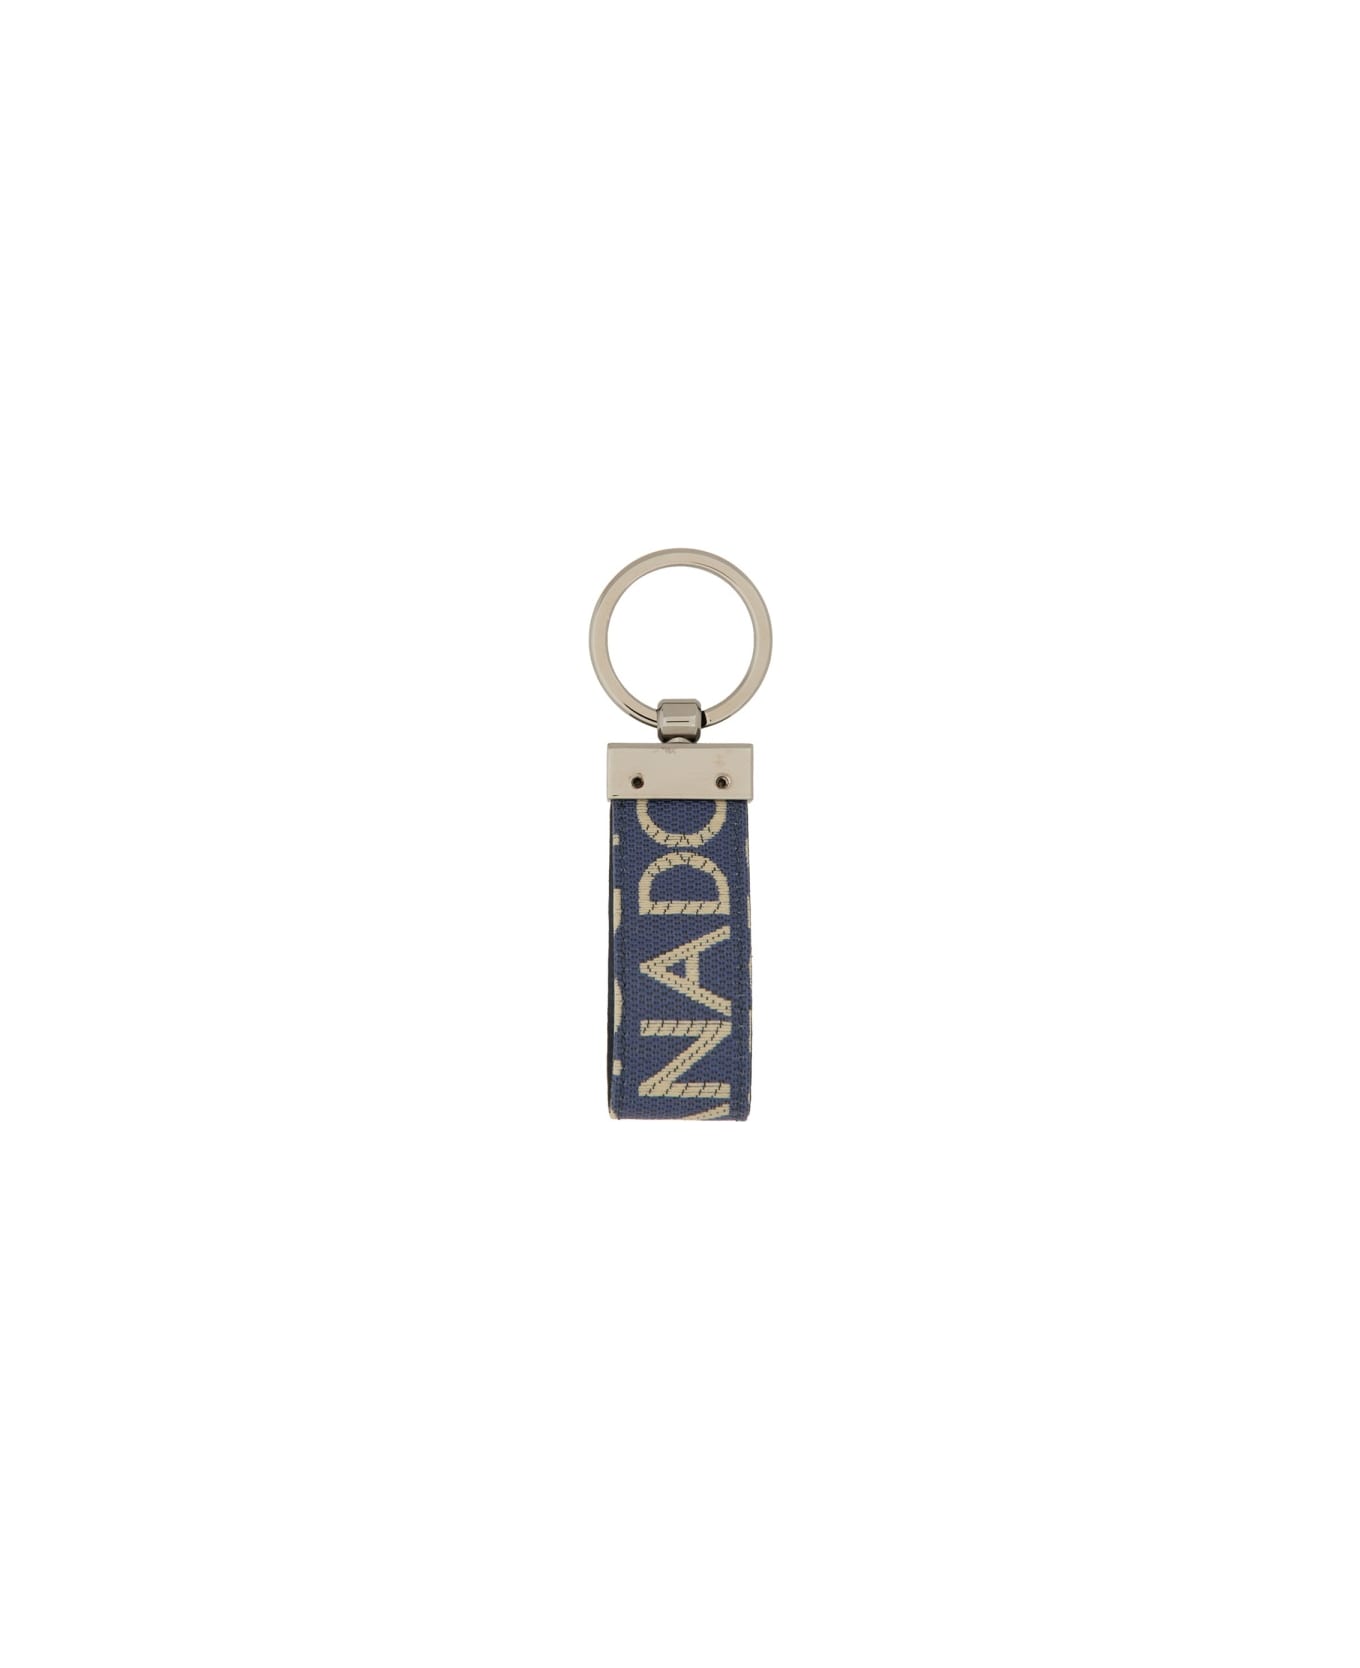 Dolce & Gabbana Keychain With Logoed Label - BLUE